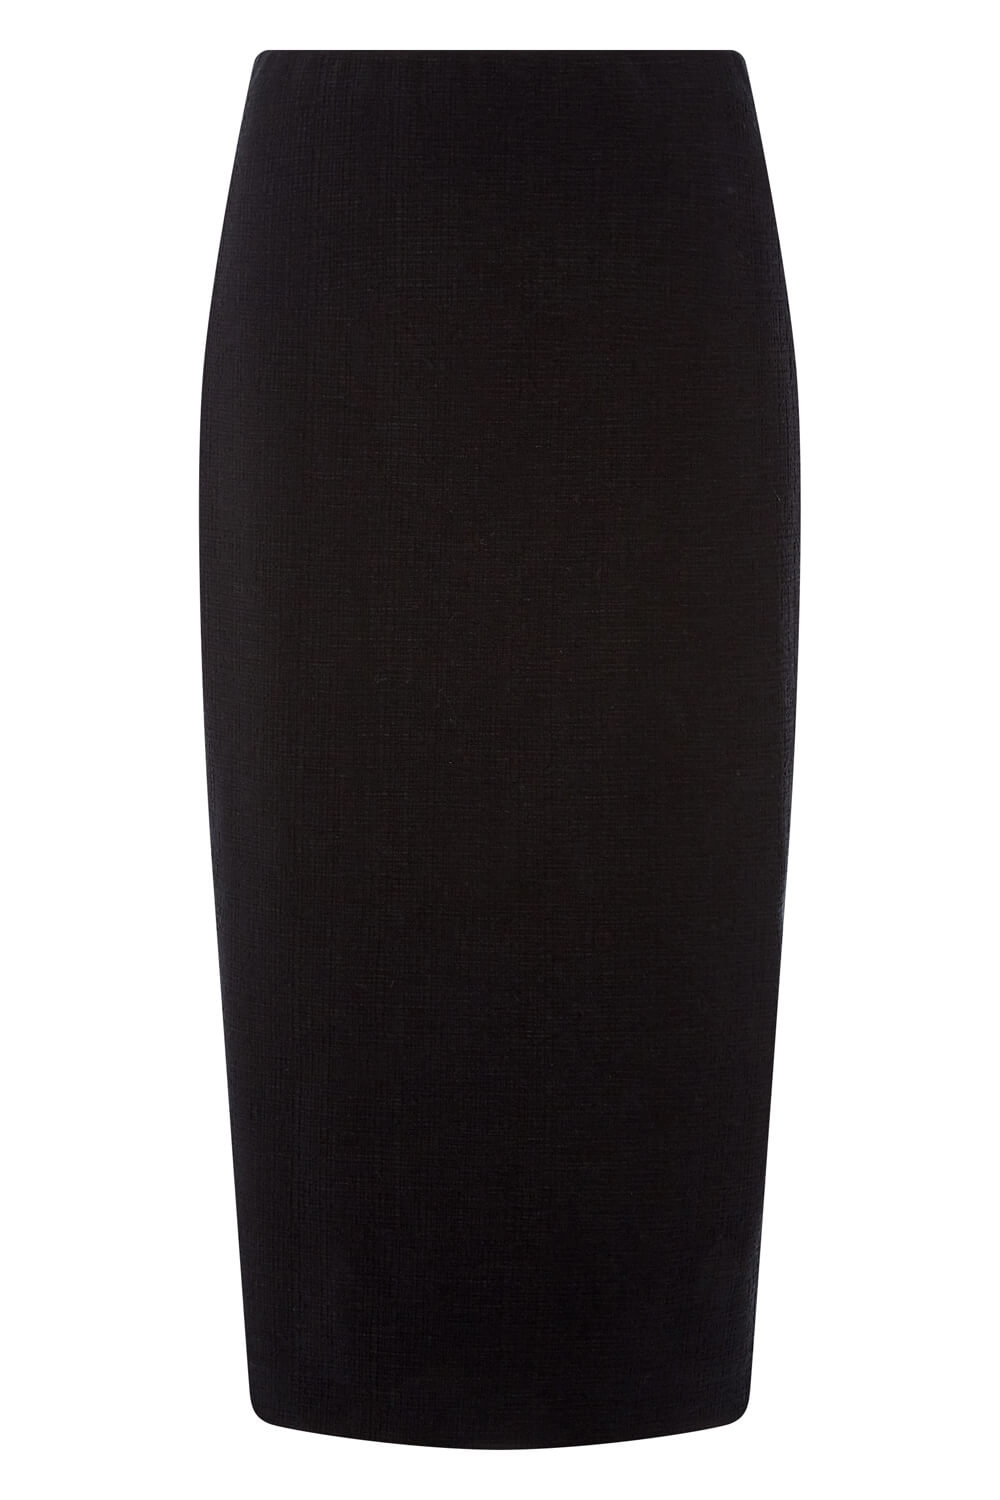 Black Stretch Jersey Textured Pencil Skirt, Image 6 of 6